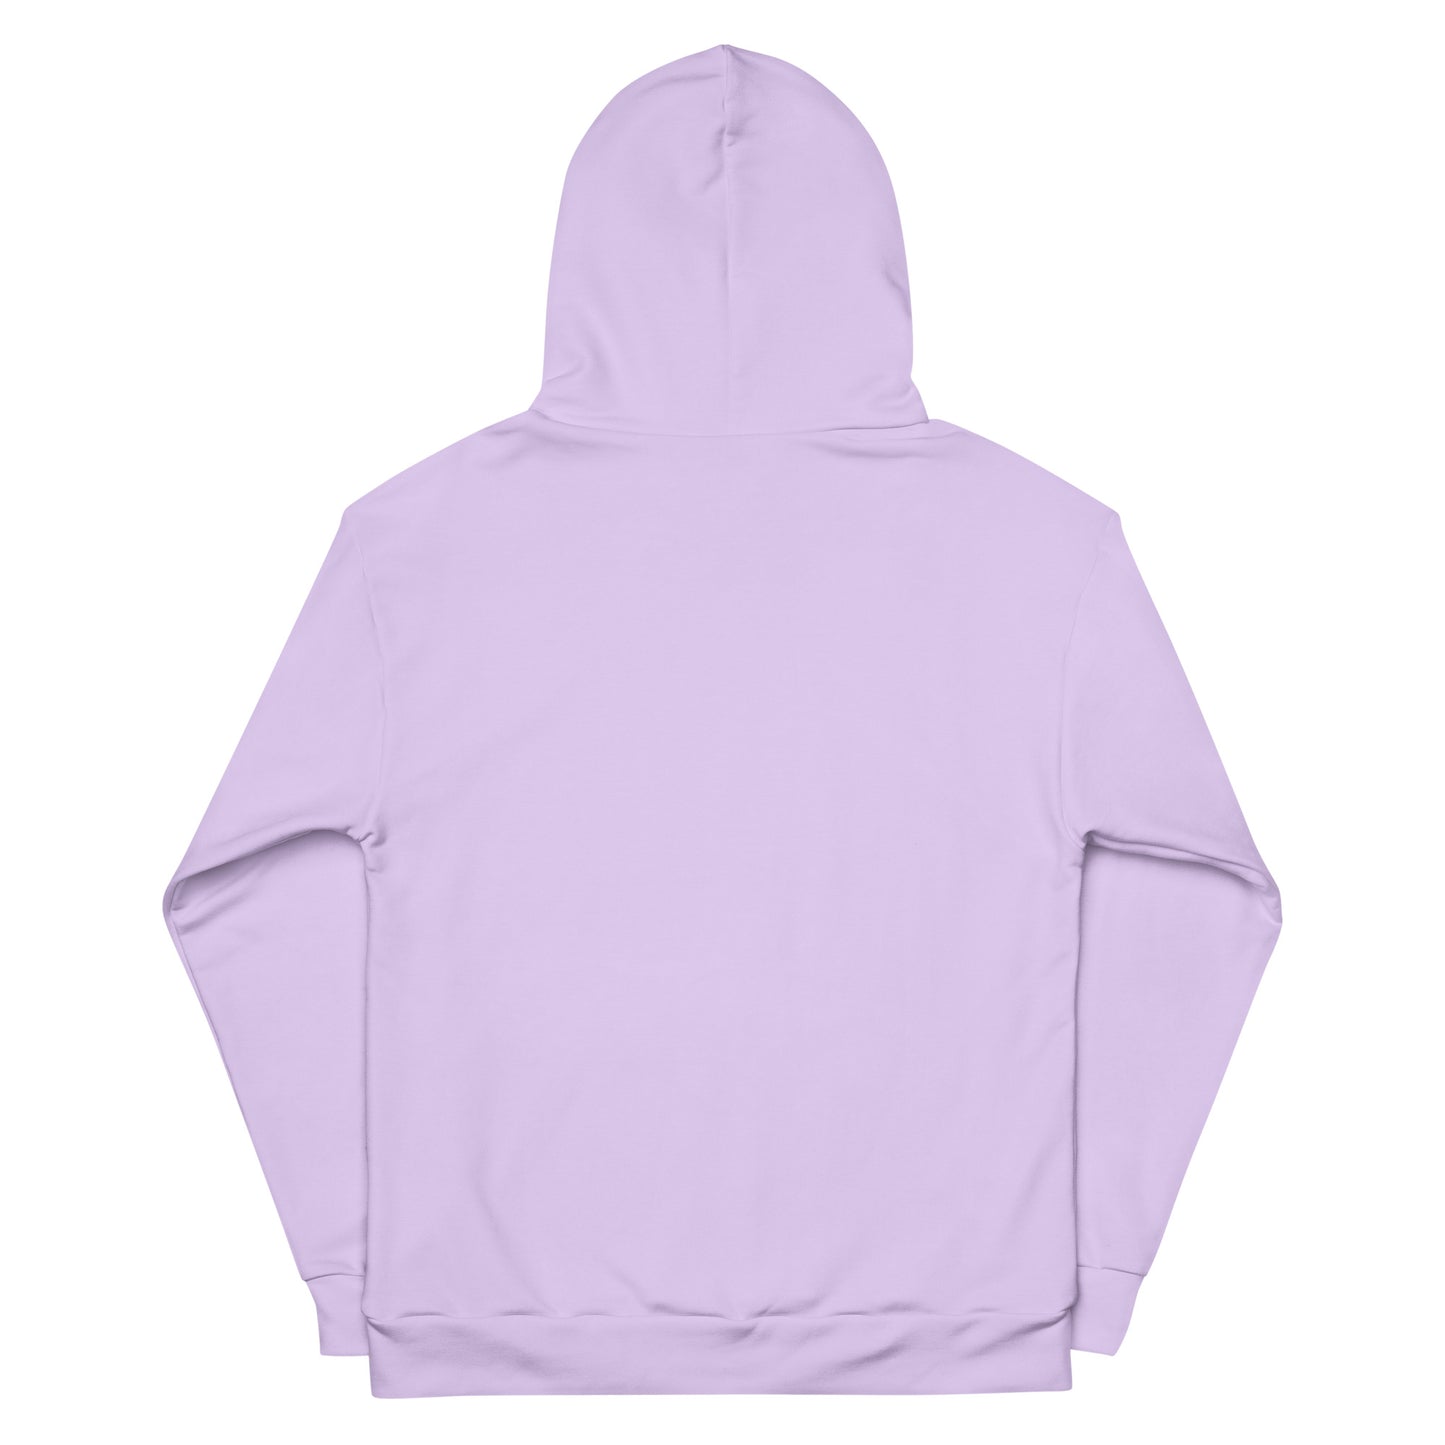 Maeve Climate Change Global Warming Statement - Sustainably Made Hoodie